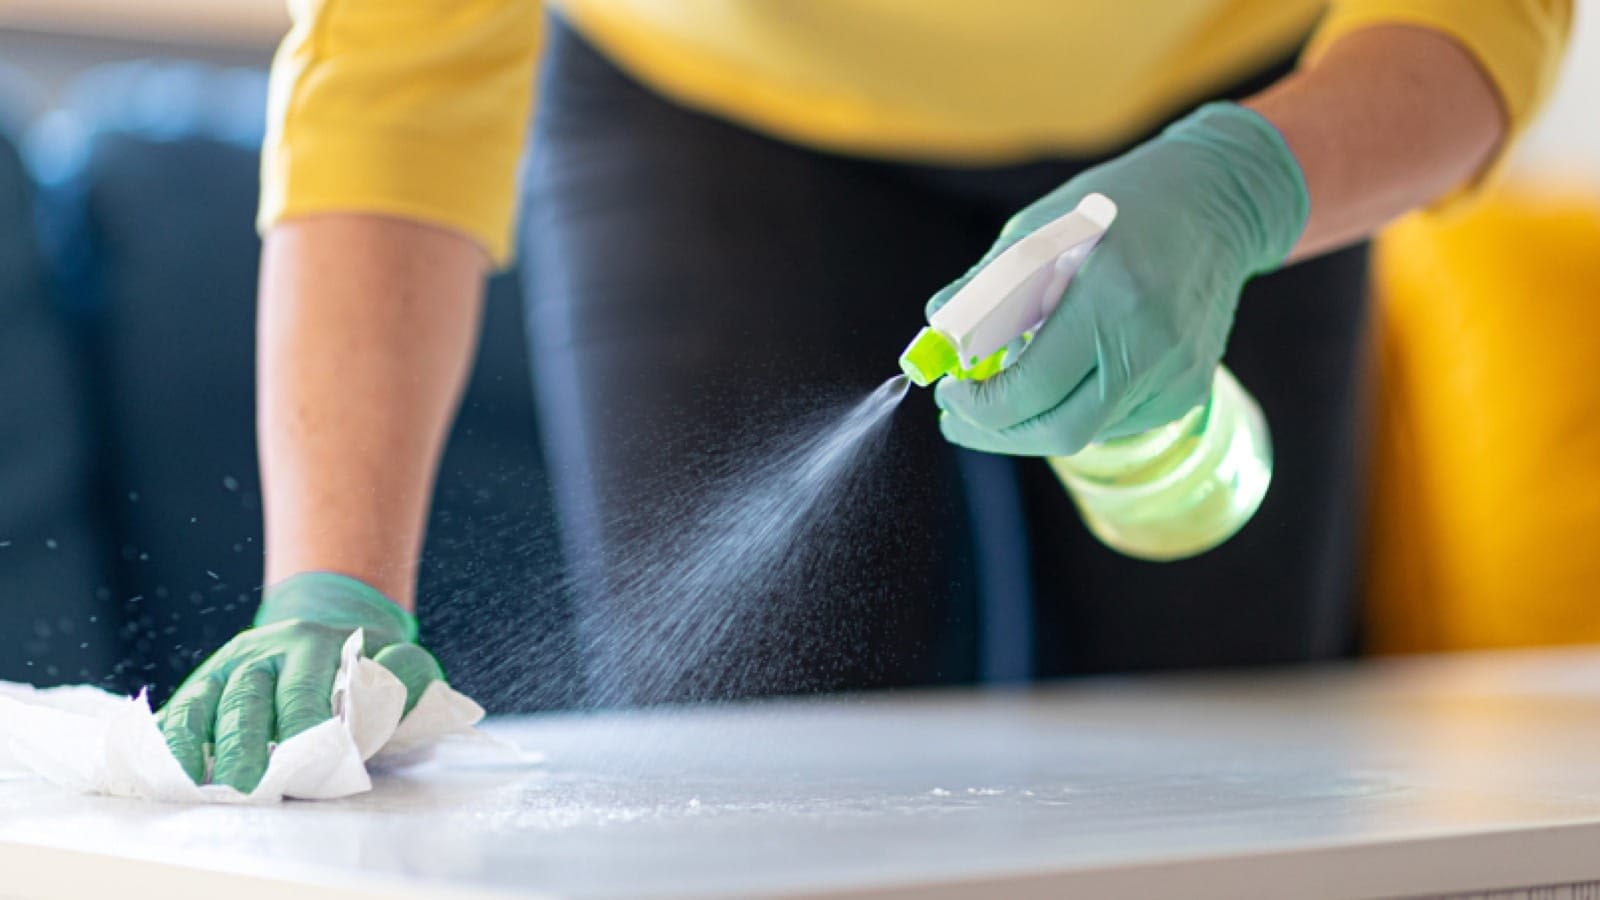 Cleaning a countertop